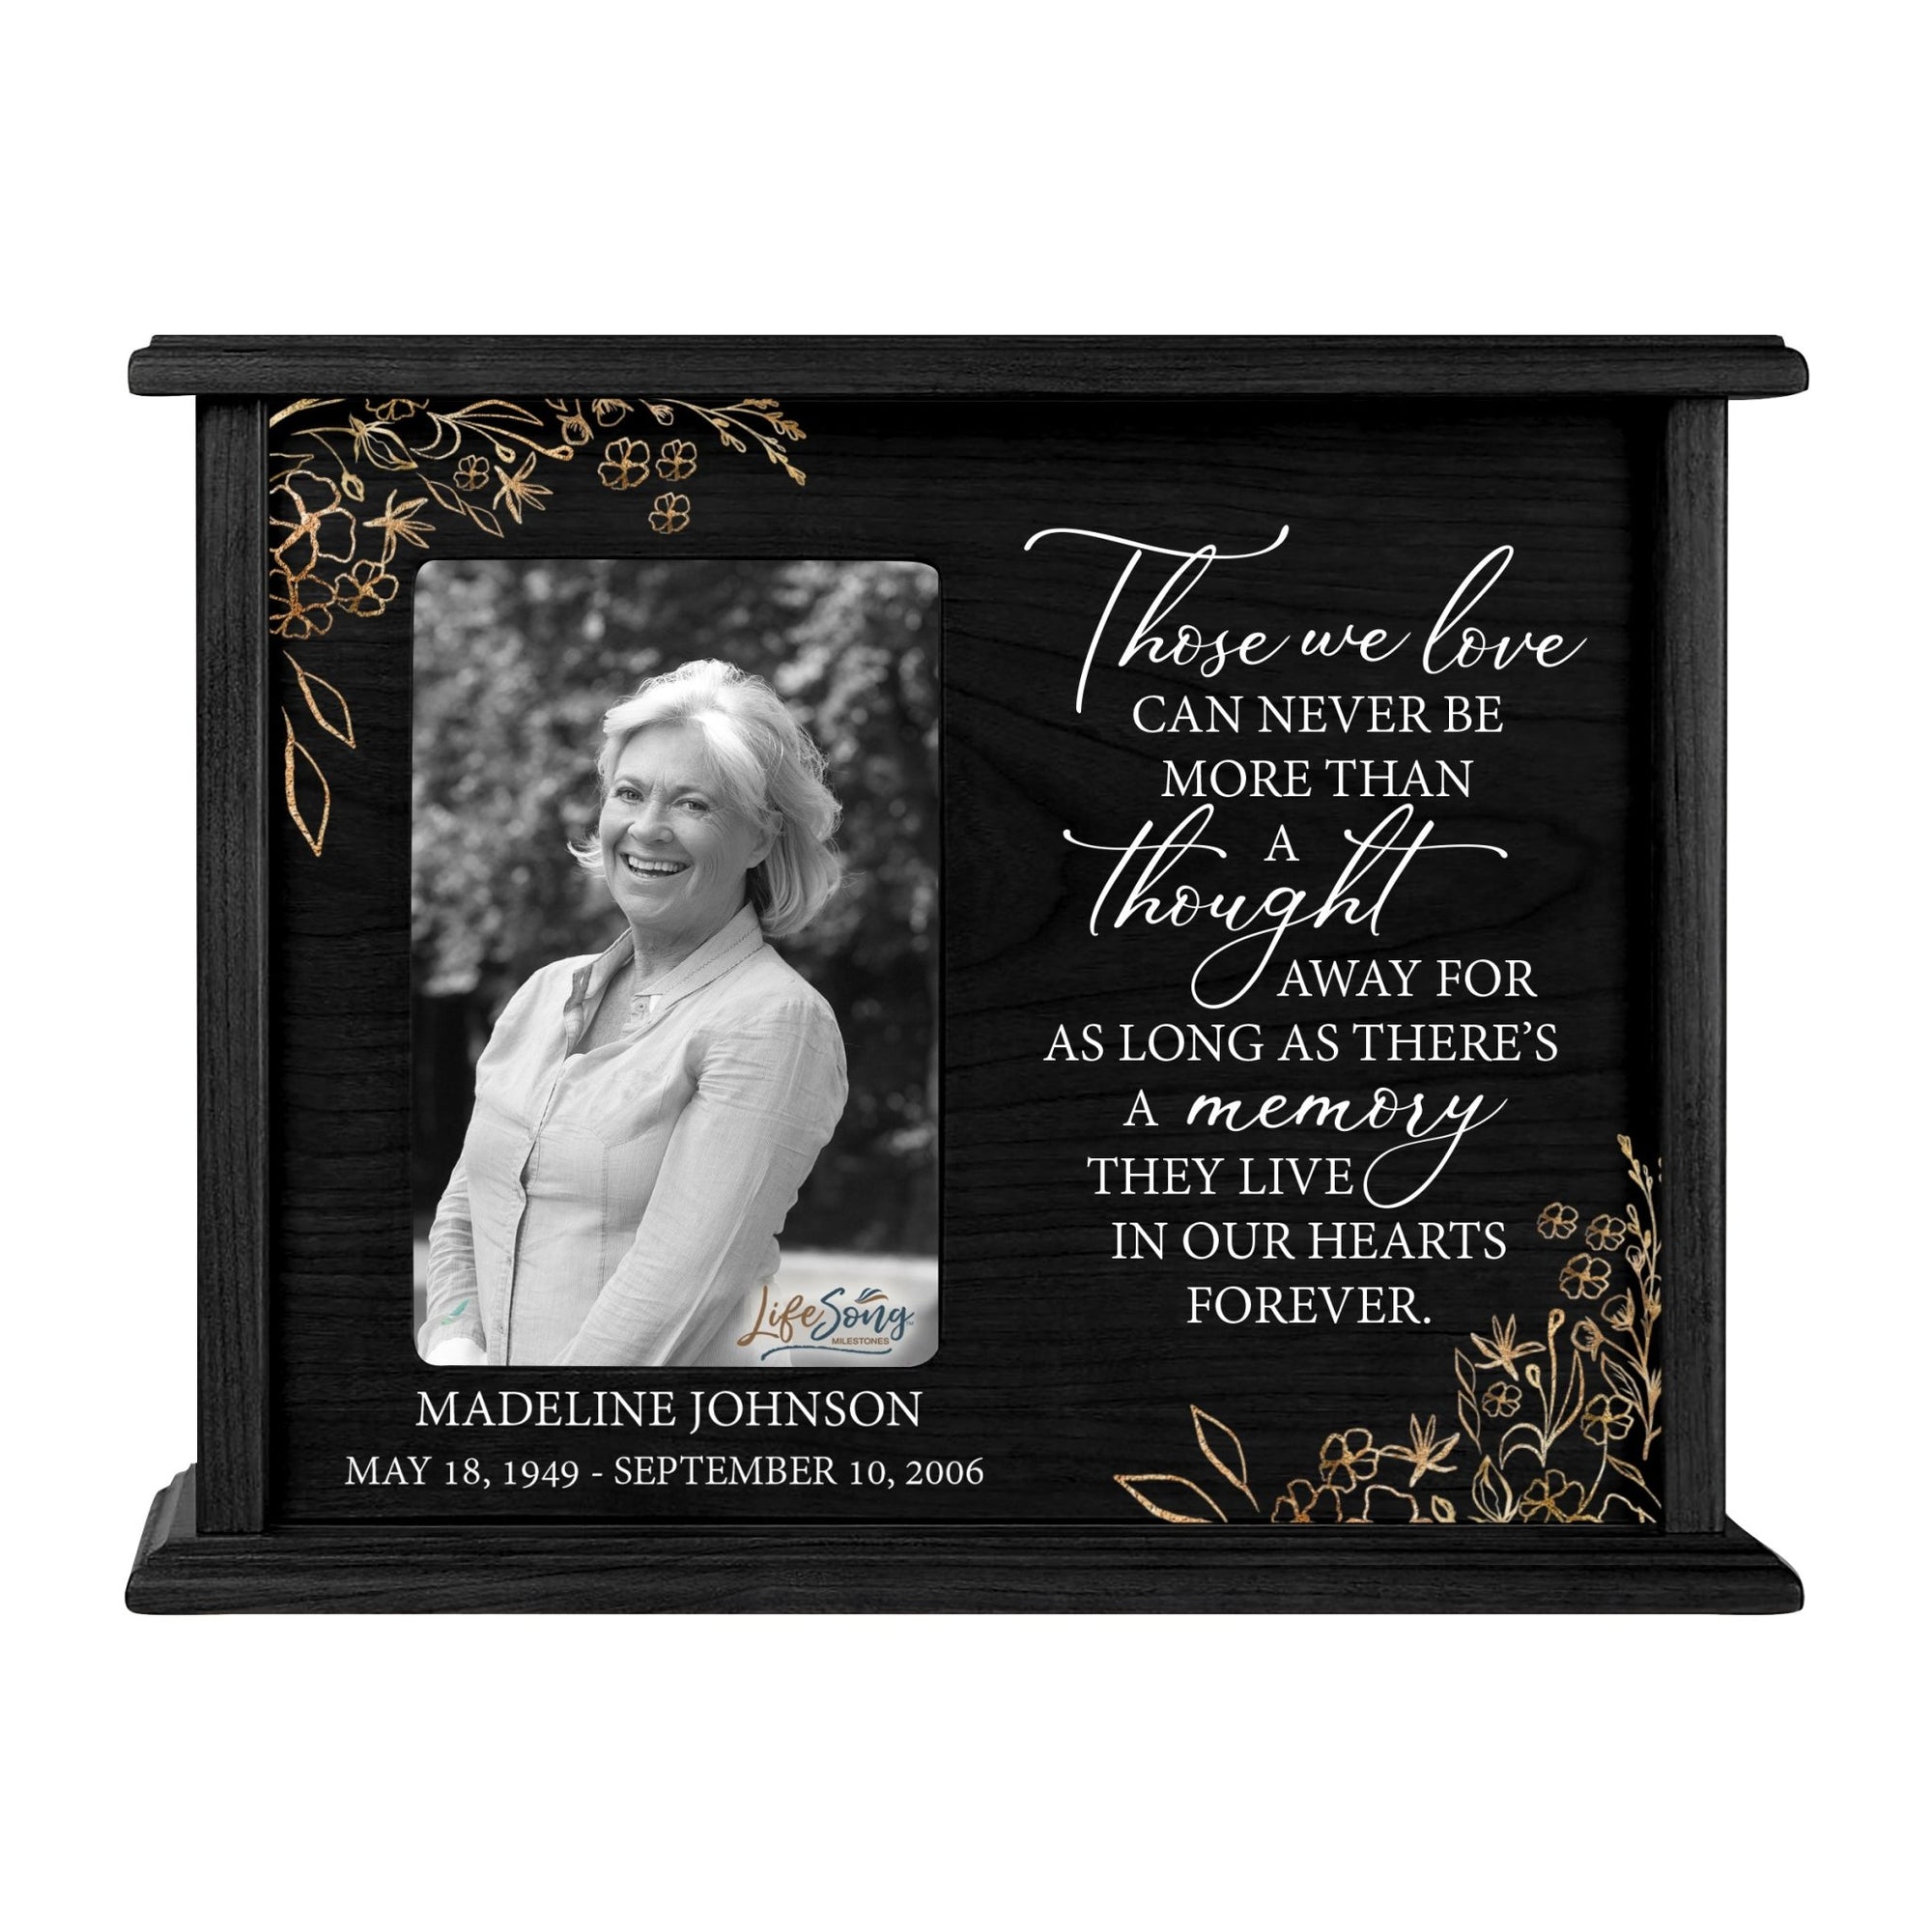 Personalized Memorial Cherry Wood 12 x 4.5 x 9 Cremation Urn Box with Picture Frame holds 200 cu in of Human Ashes and 4x6 Photo - Those We Love Can Never (Black) - LifeSong Milestones